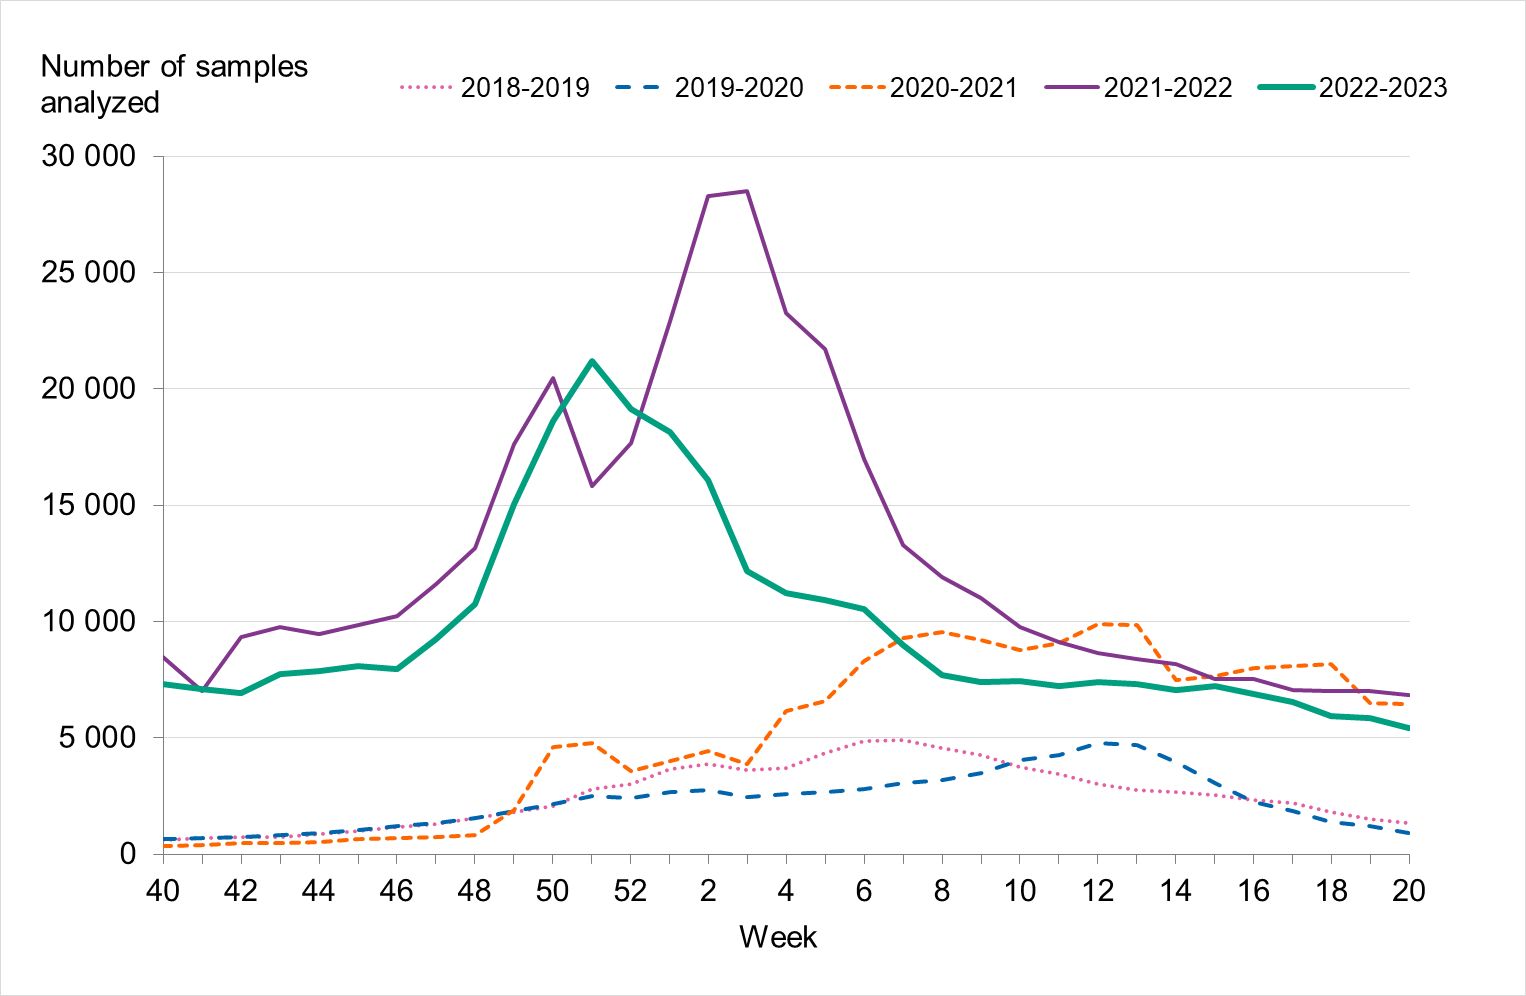 Testing per week was much higher during 2021-2022 and 2022-2023 than before the pandemic.